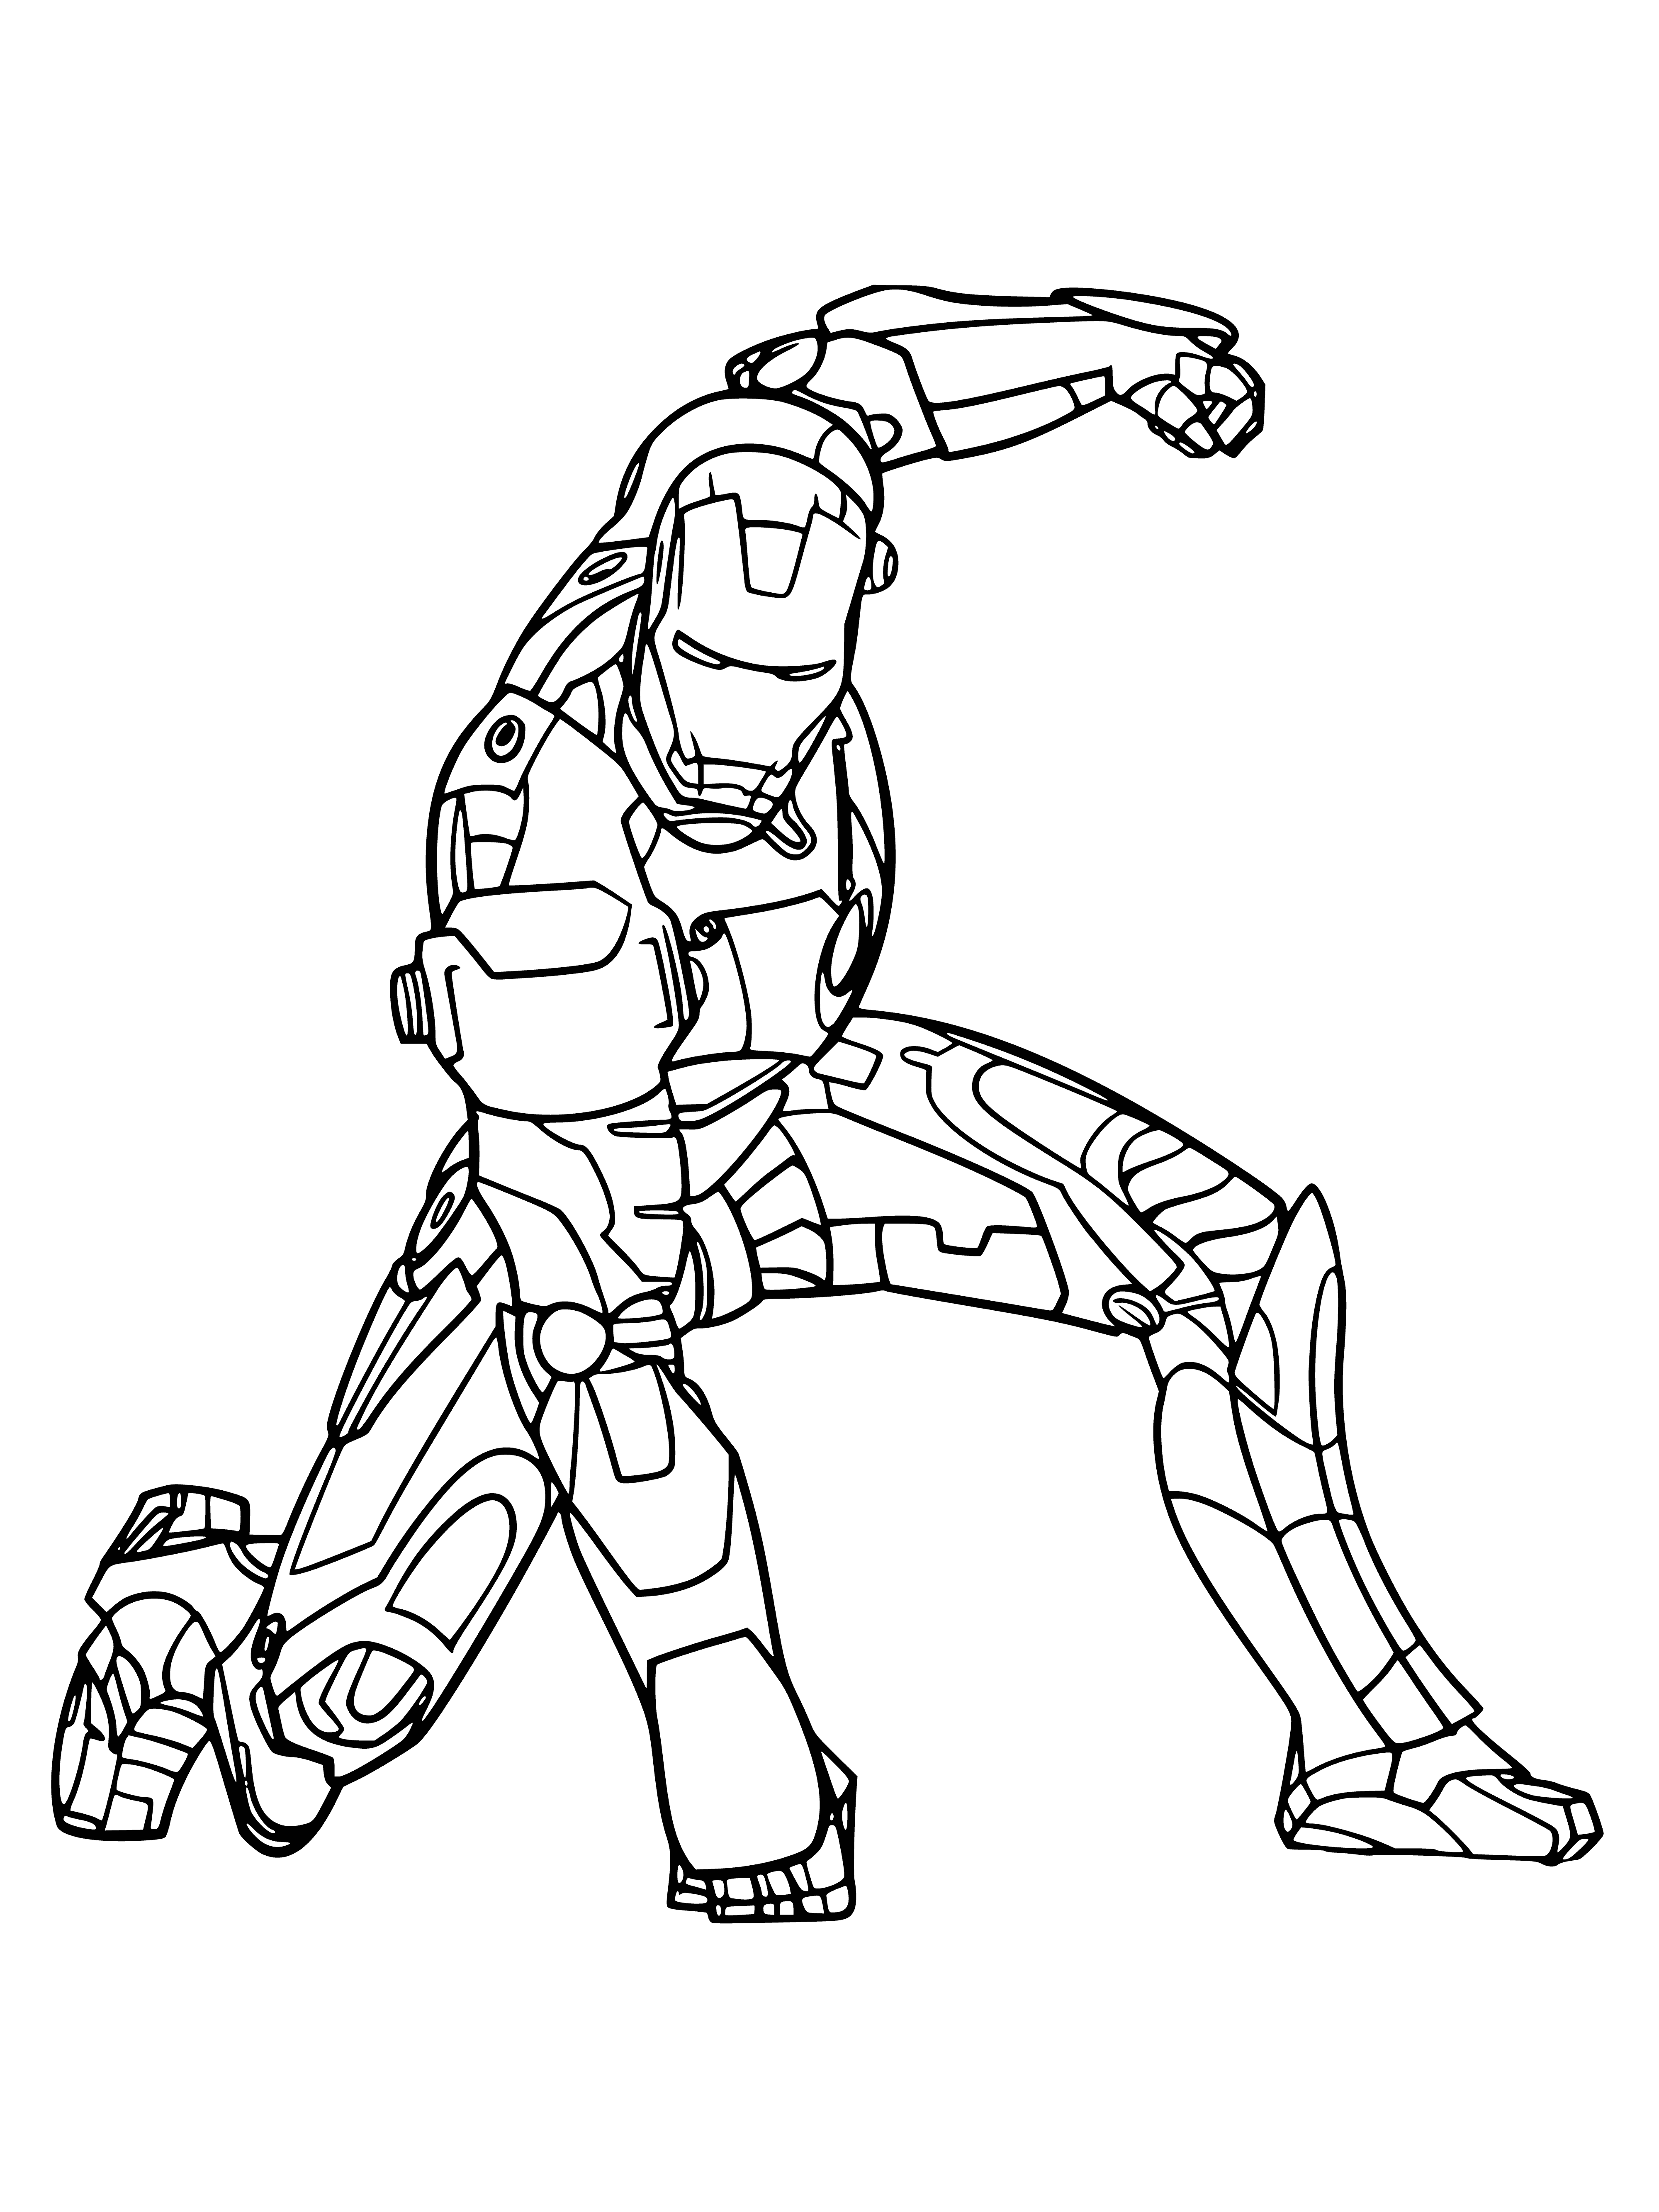 coloring page: Man in metal suit flying, shooting lasers from eyes and smiling with jetpack on back. #superhero #coloringpage